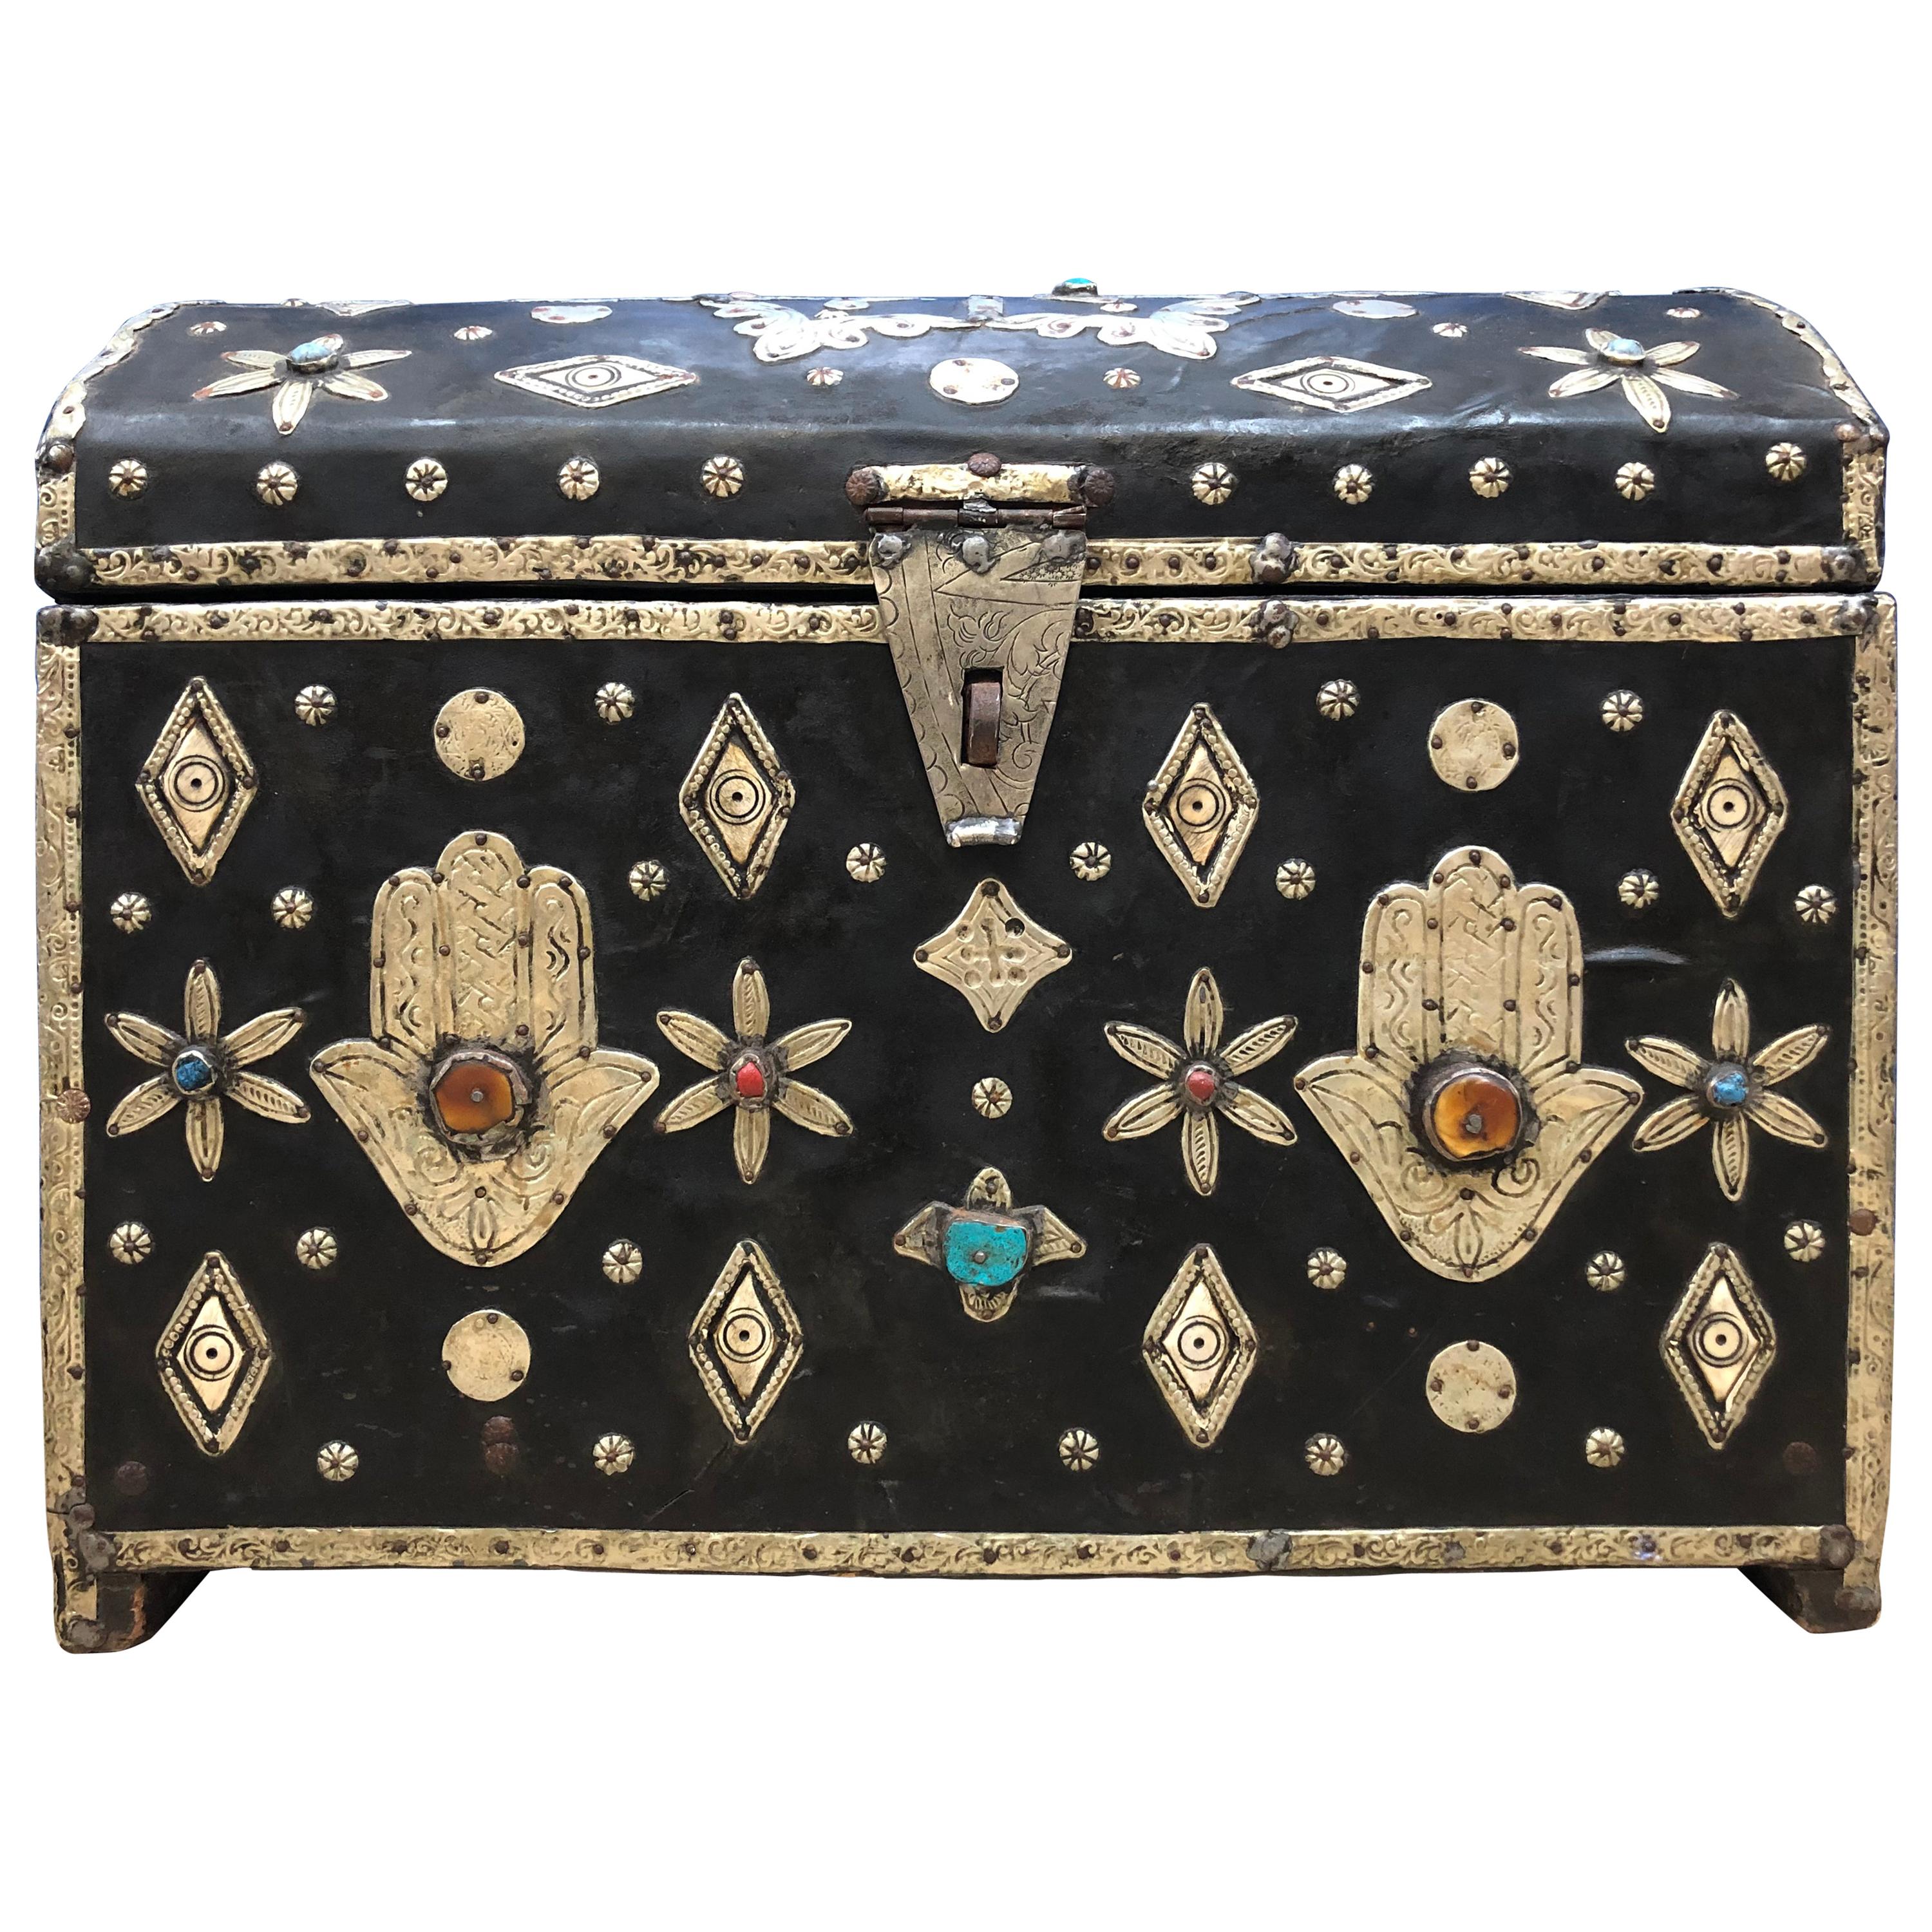 Early 1900s Moroccan Chest - Leather, Bone, Silver, Gems, Hamsa - Luxe Boho Chic For Sale